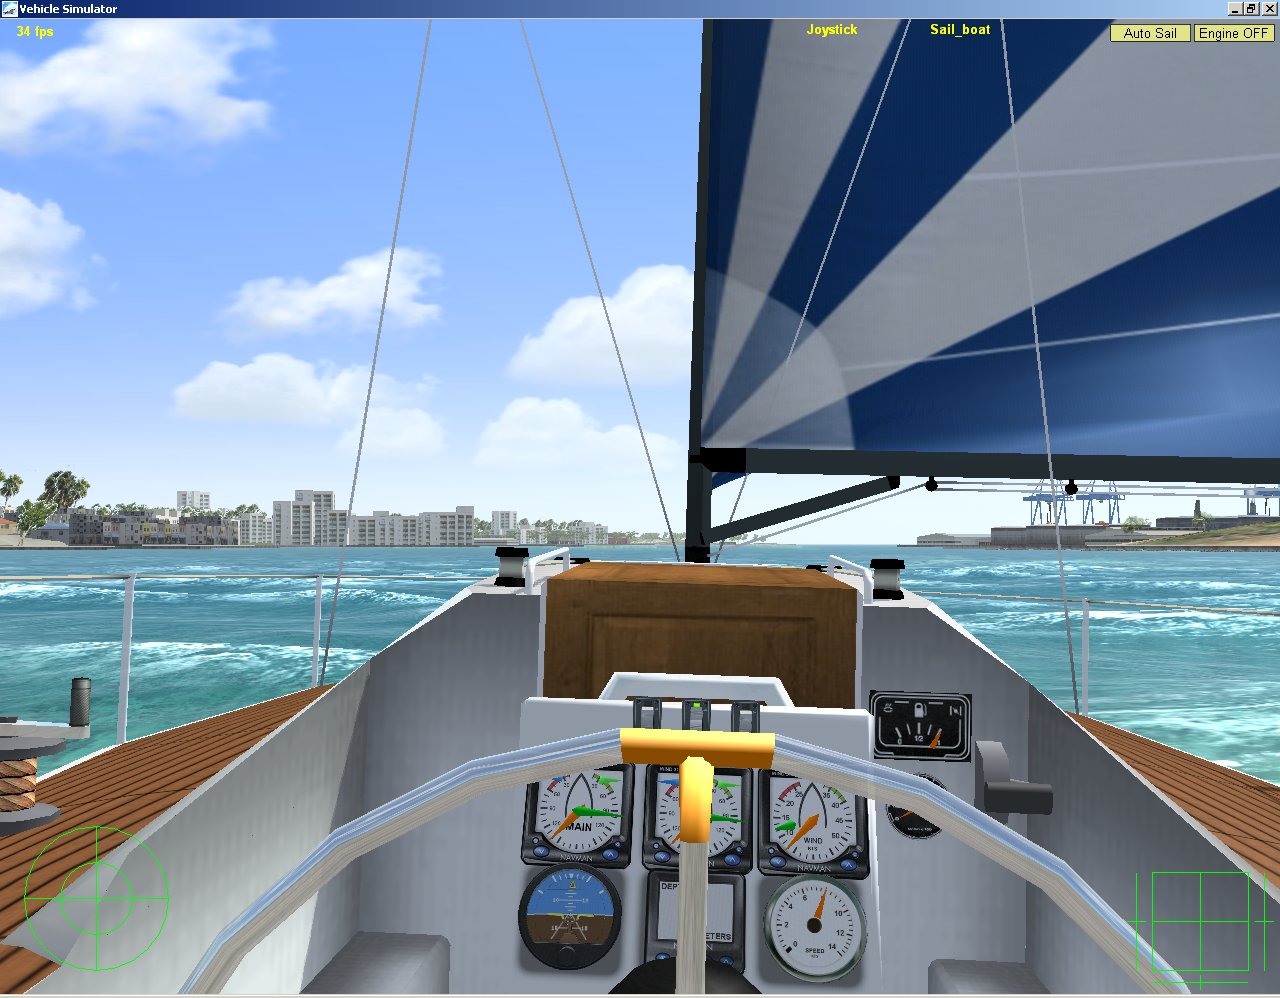 Vehicle Simulator On Steam - roblox how to get the yacht for free vehicle simulator